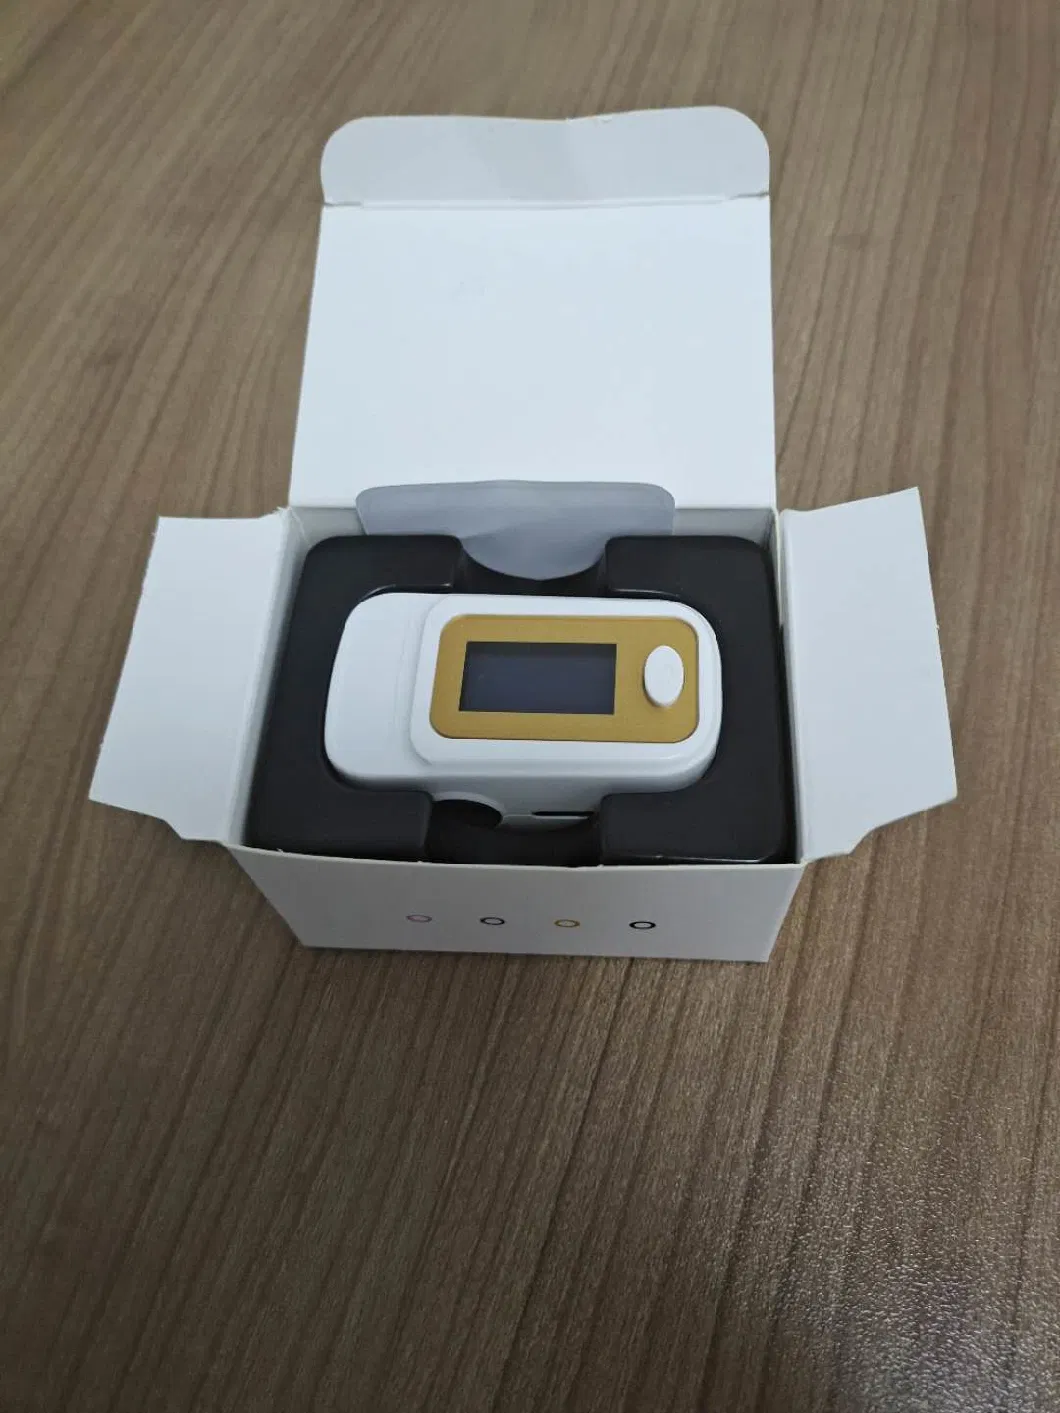 CE&FDA Approved Humanized Design Medical SpO2 ECG Fingertip Pulse Oximeter with Compact Design for Household Sonosat-F02p